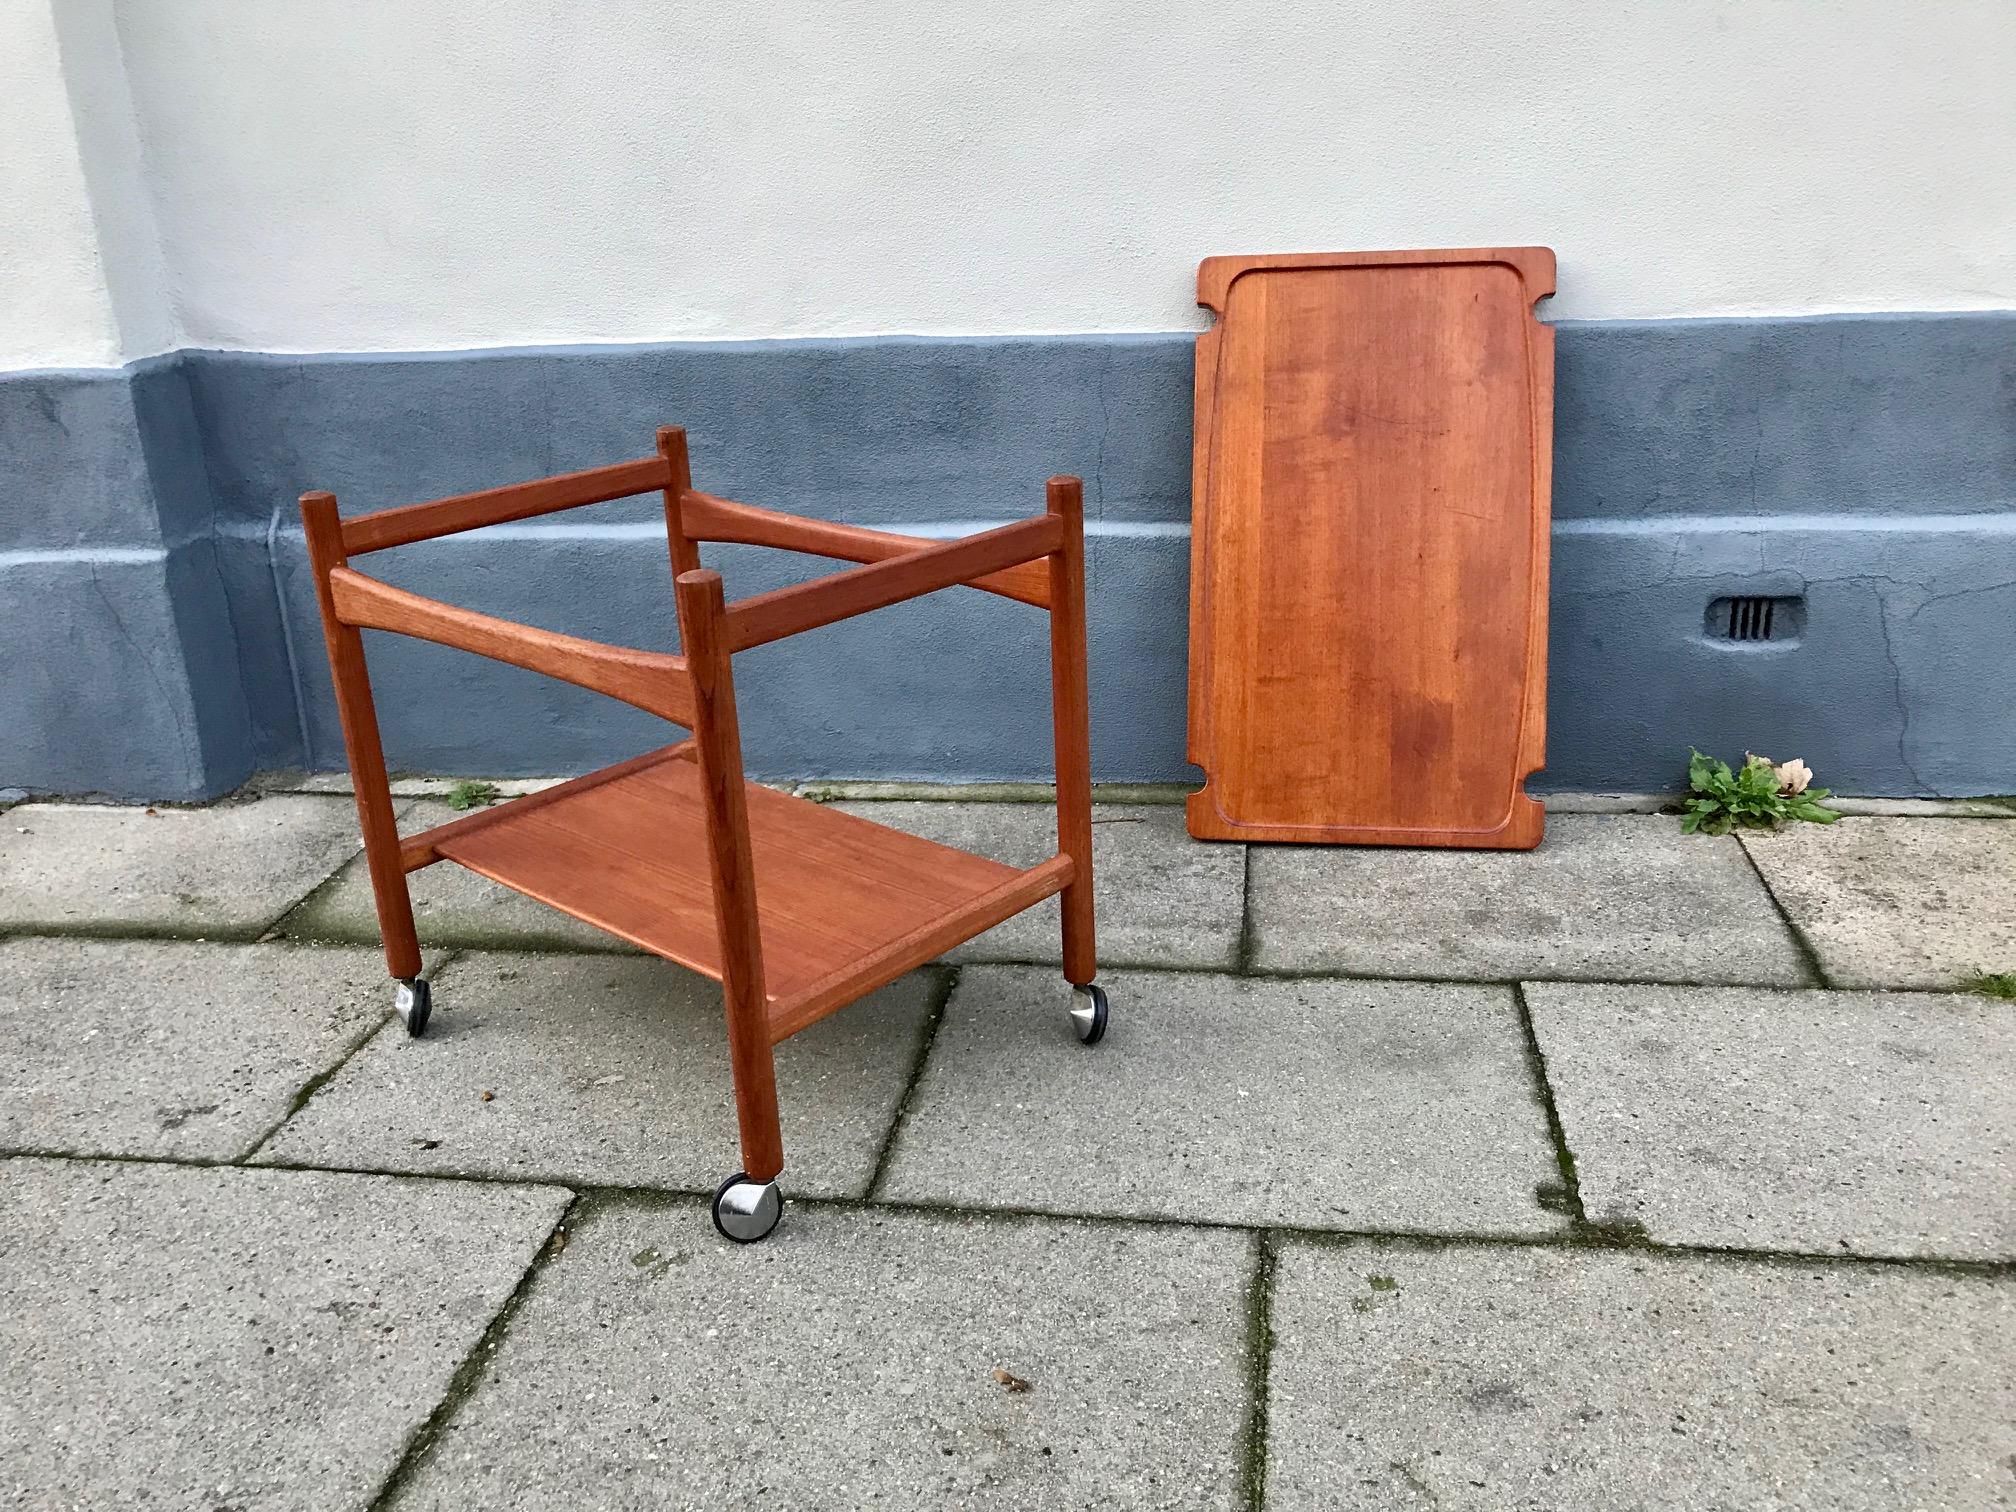 Hans Jørgen Wegner bar, serving cart with removable tray. Made in Denmark by PP Møbler. All original condition, no restorations. Lovely golden patina and lighter signs of ware. The tray top is solid teak, removable and finished on both sides.